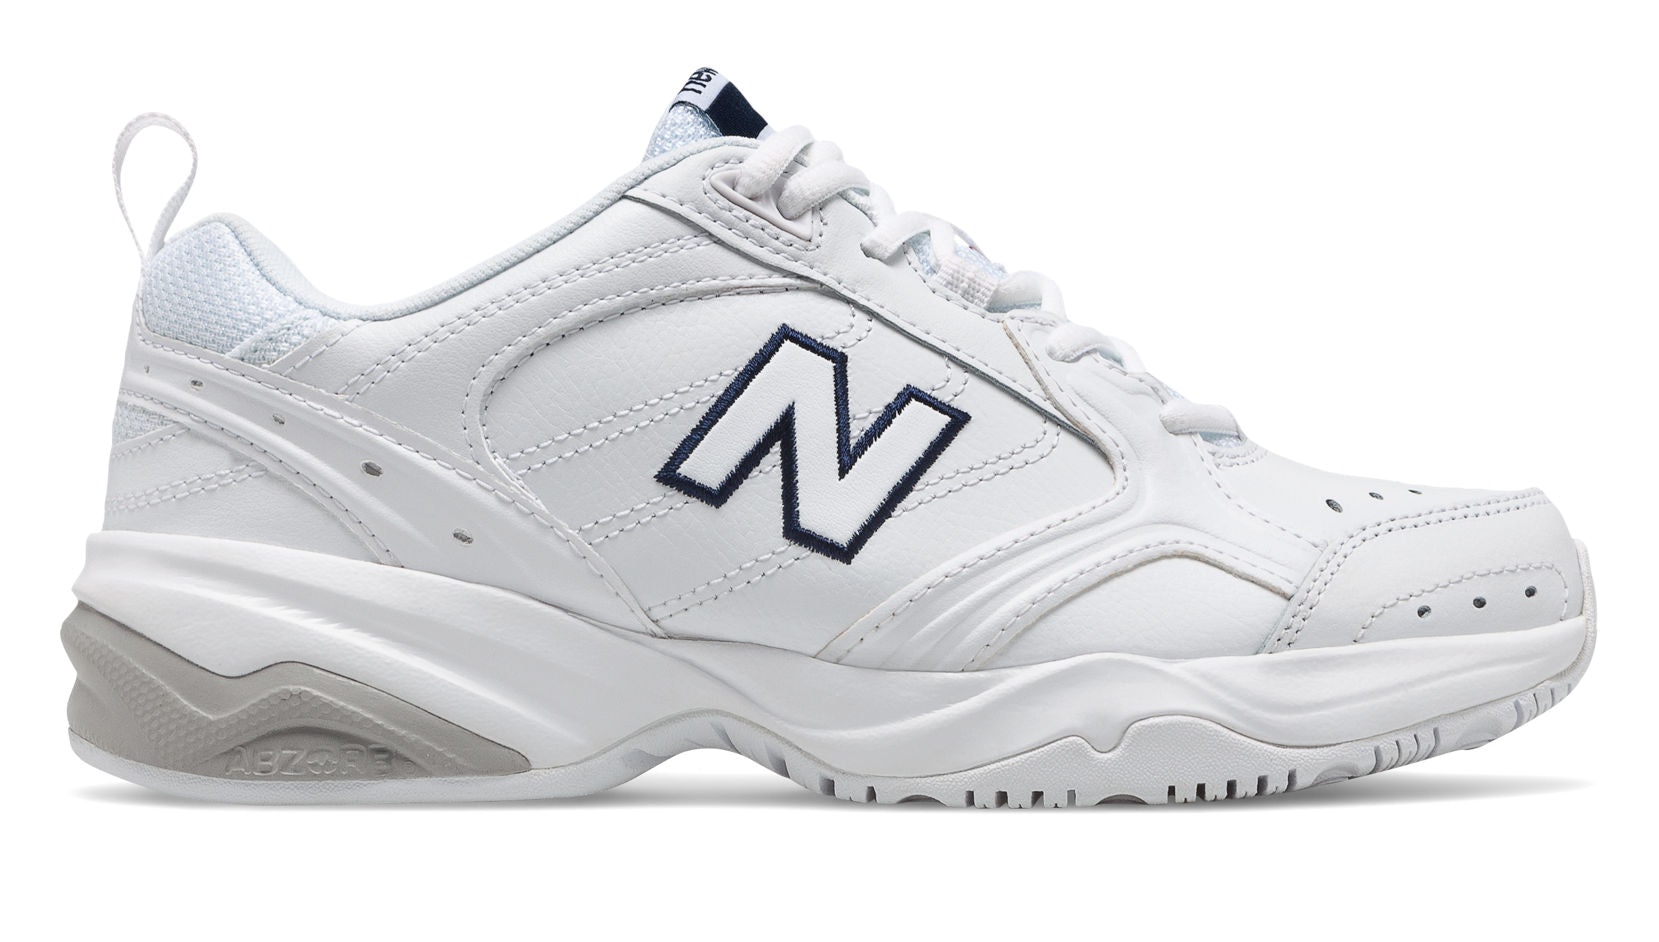 white dad sneakers